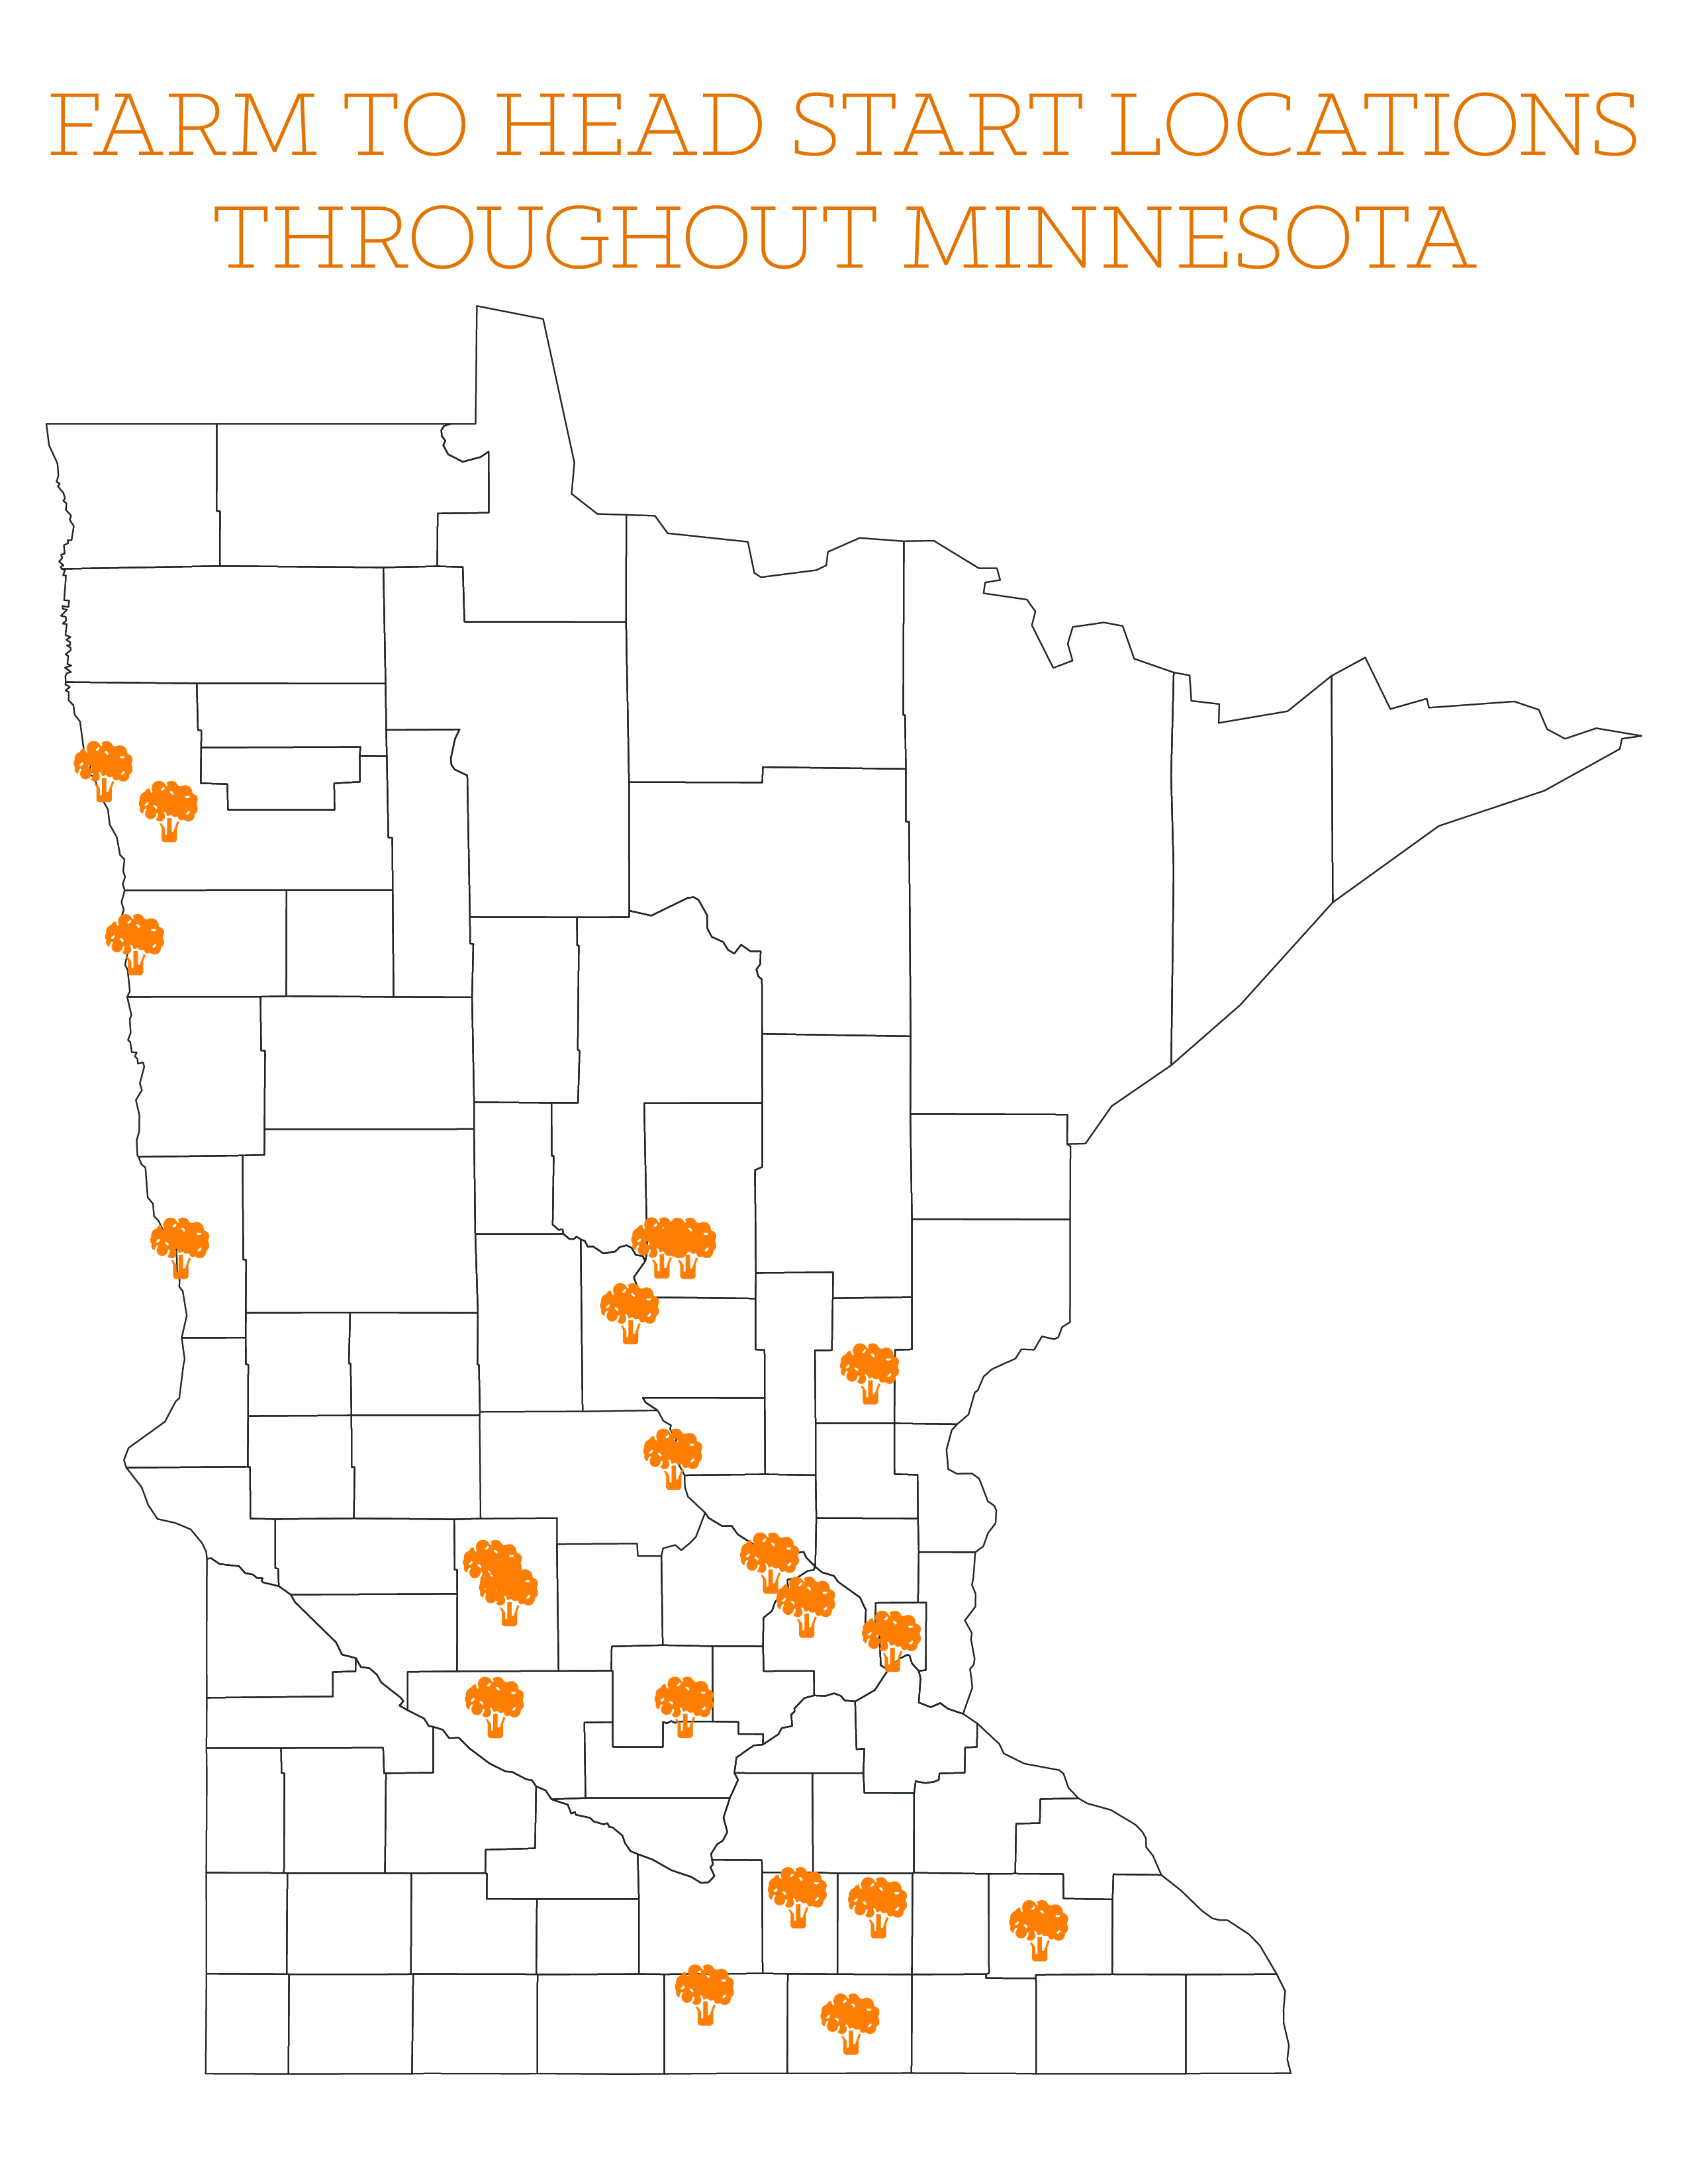 Map of Farm to Head Start locations throughout Minnesota